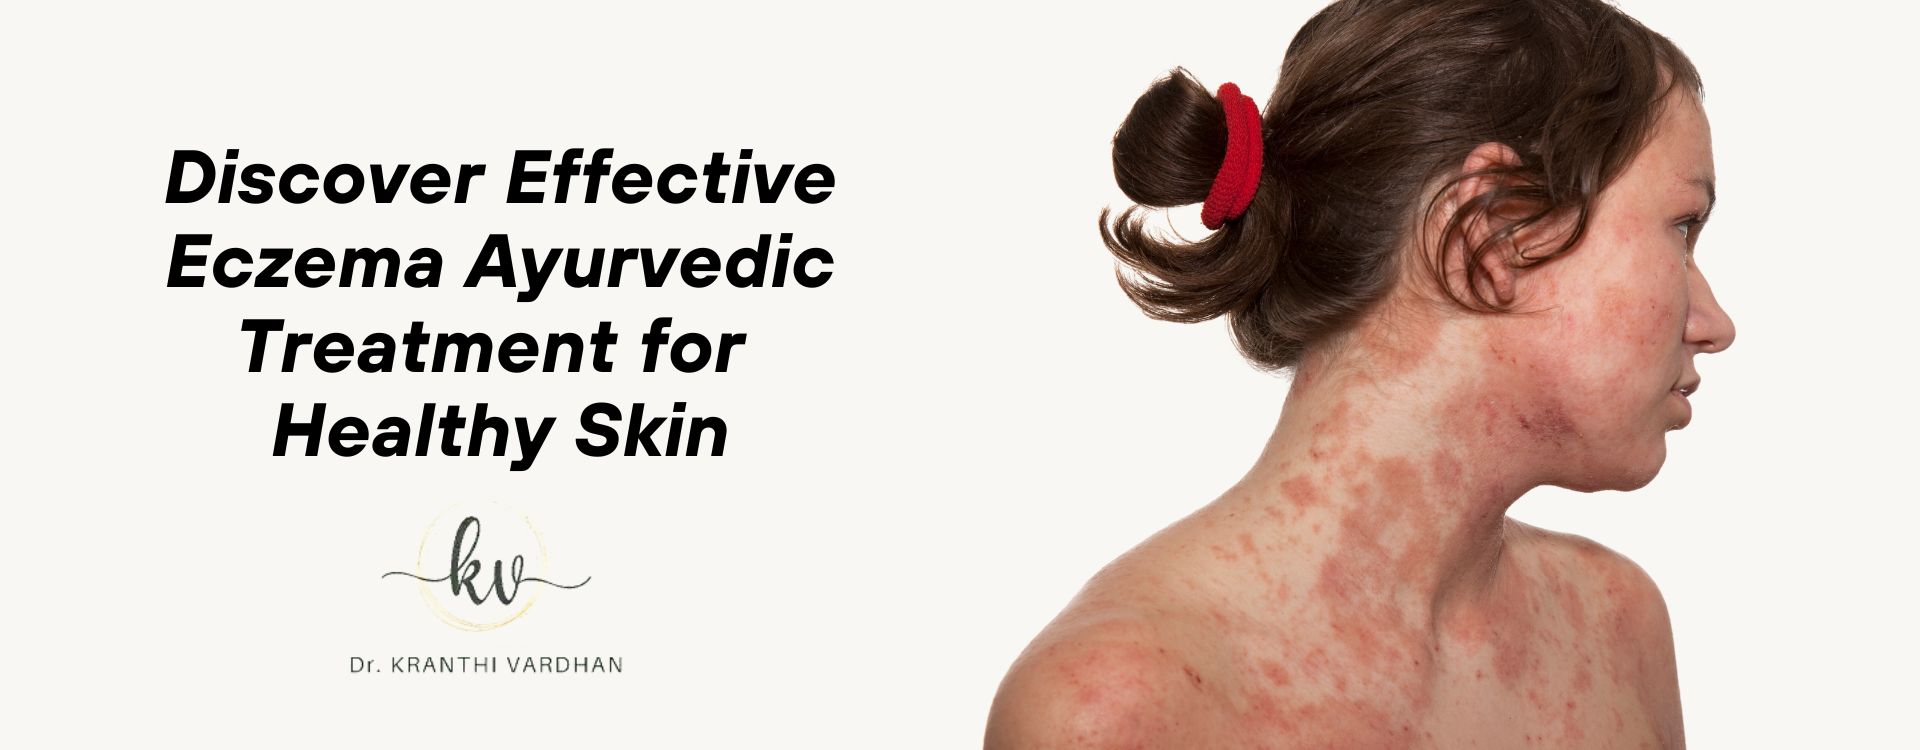 Discover Effective Eczema Ayurvedic Treatment for Healthy Skin